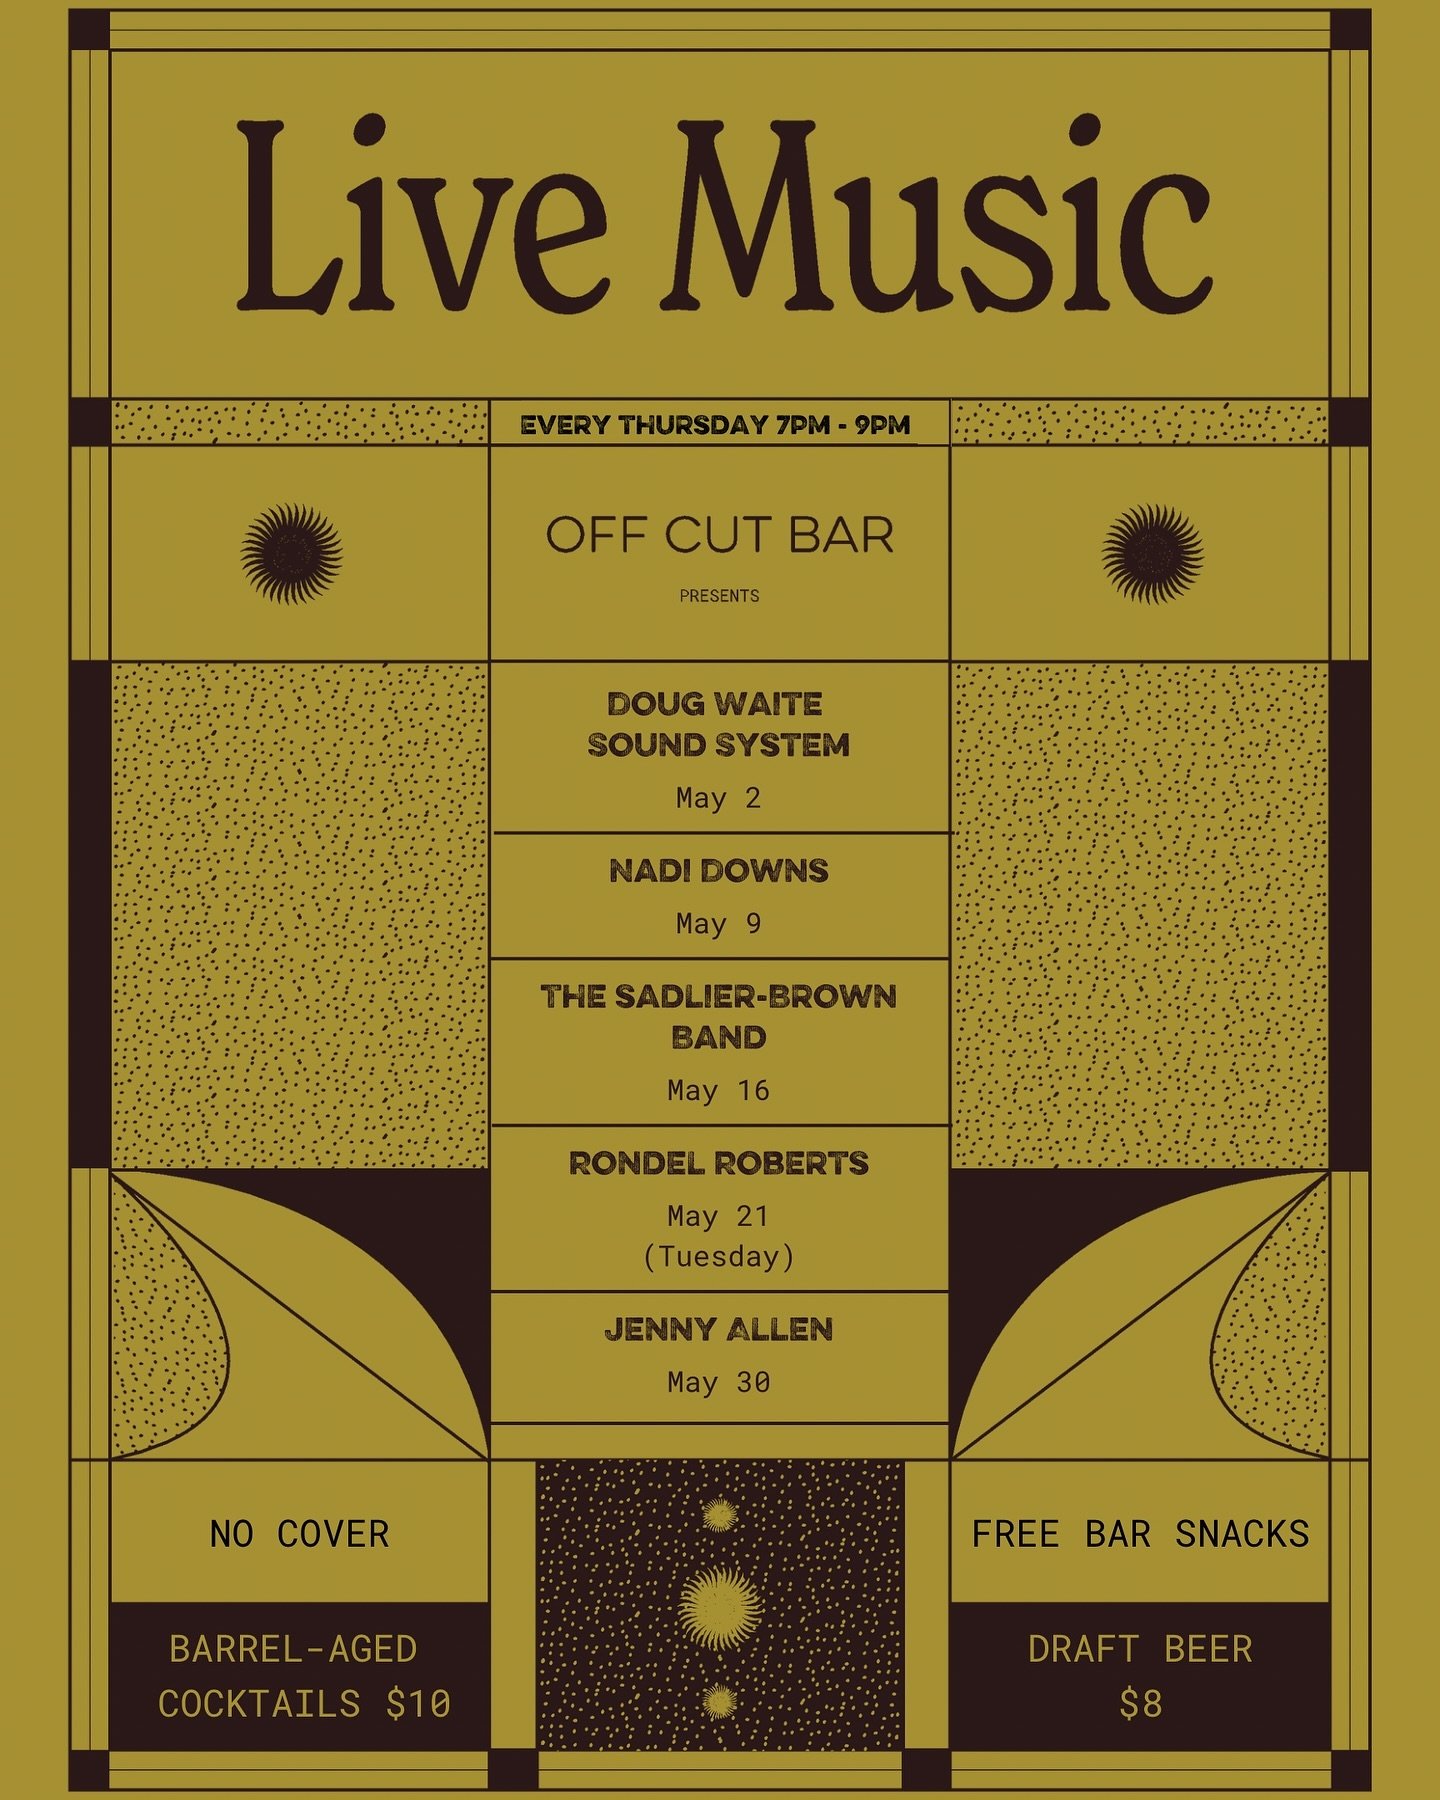 New live music for May! This month&rsquo;s @offcutbar live music roster runs the gamut of styles - so you&rsquo;re guaranteed to find something you love, or discover even more of Calgary&rsquo;s incredible musical talent!

Catch @dugwaite this week, 